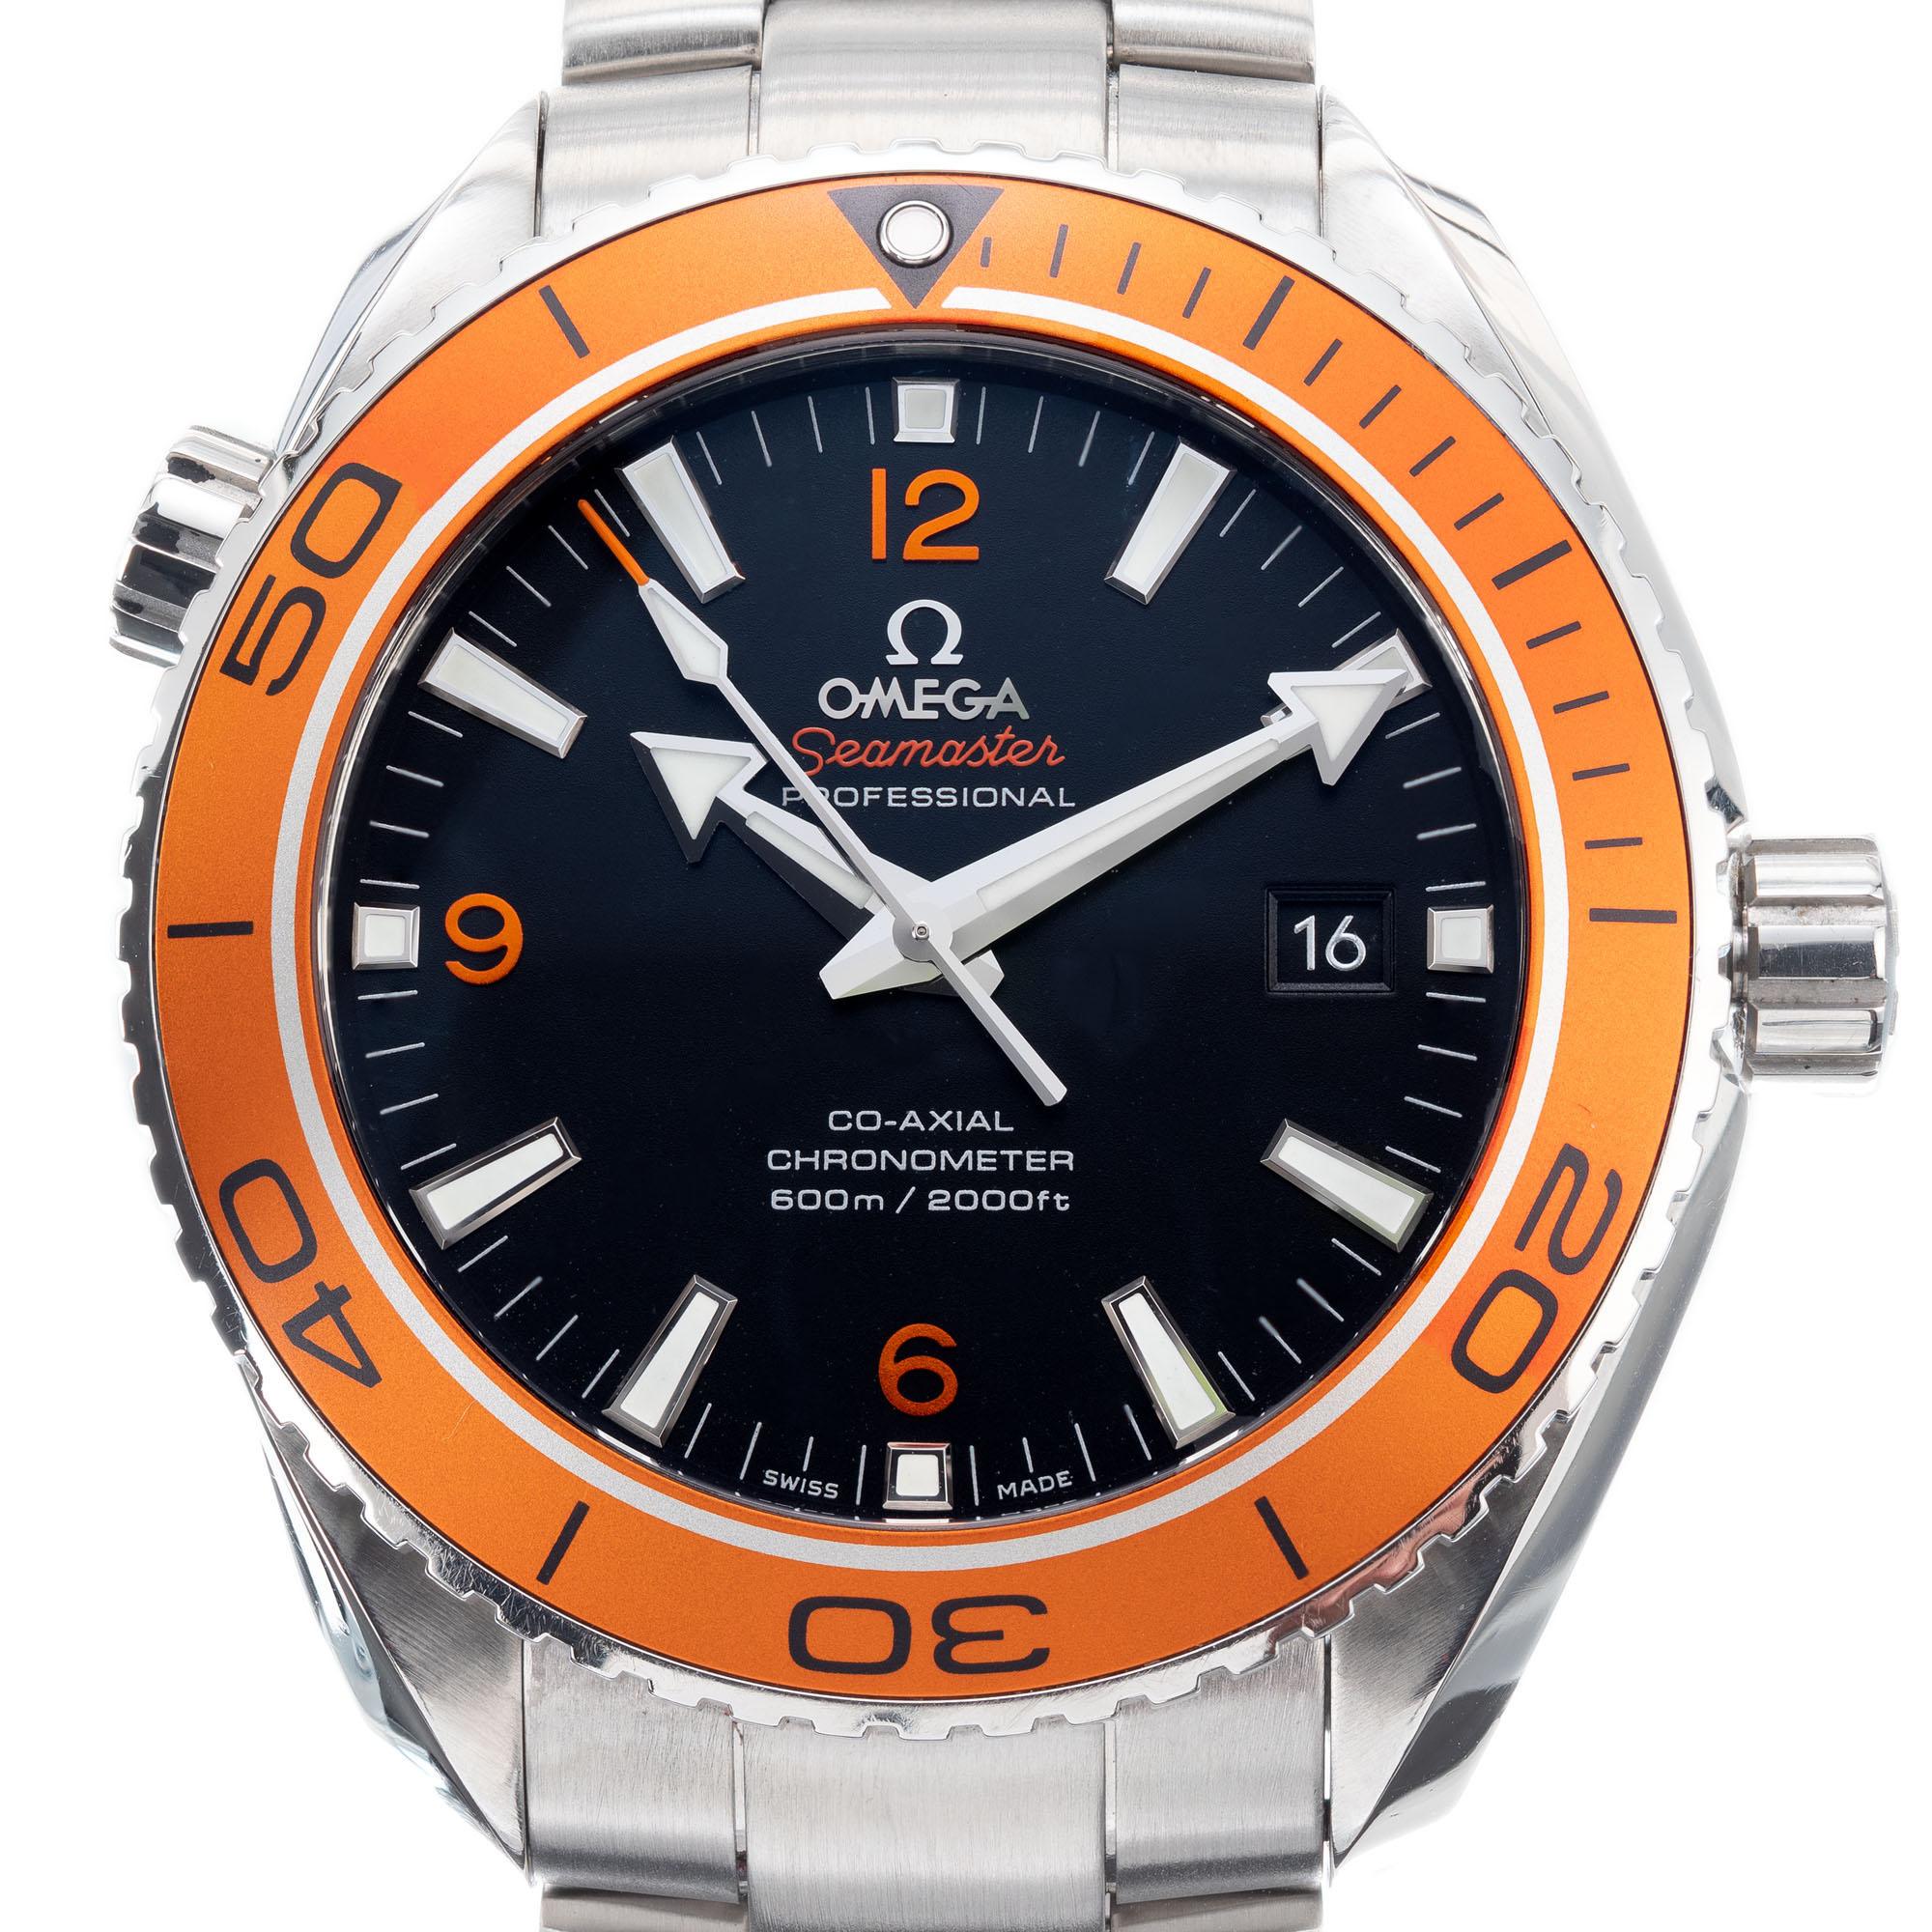 Men's large size 45mm Omega Seamaster co-axial professional steel automatic date divers wristwatch. Length 8.5 Inch band. Orange bezel and markers.

Length: 51.53mm
Width: 45.90mm
Band width at case: 22mm
Case thickness: 16.75mm
Band: Stainless